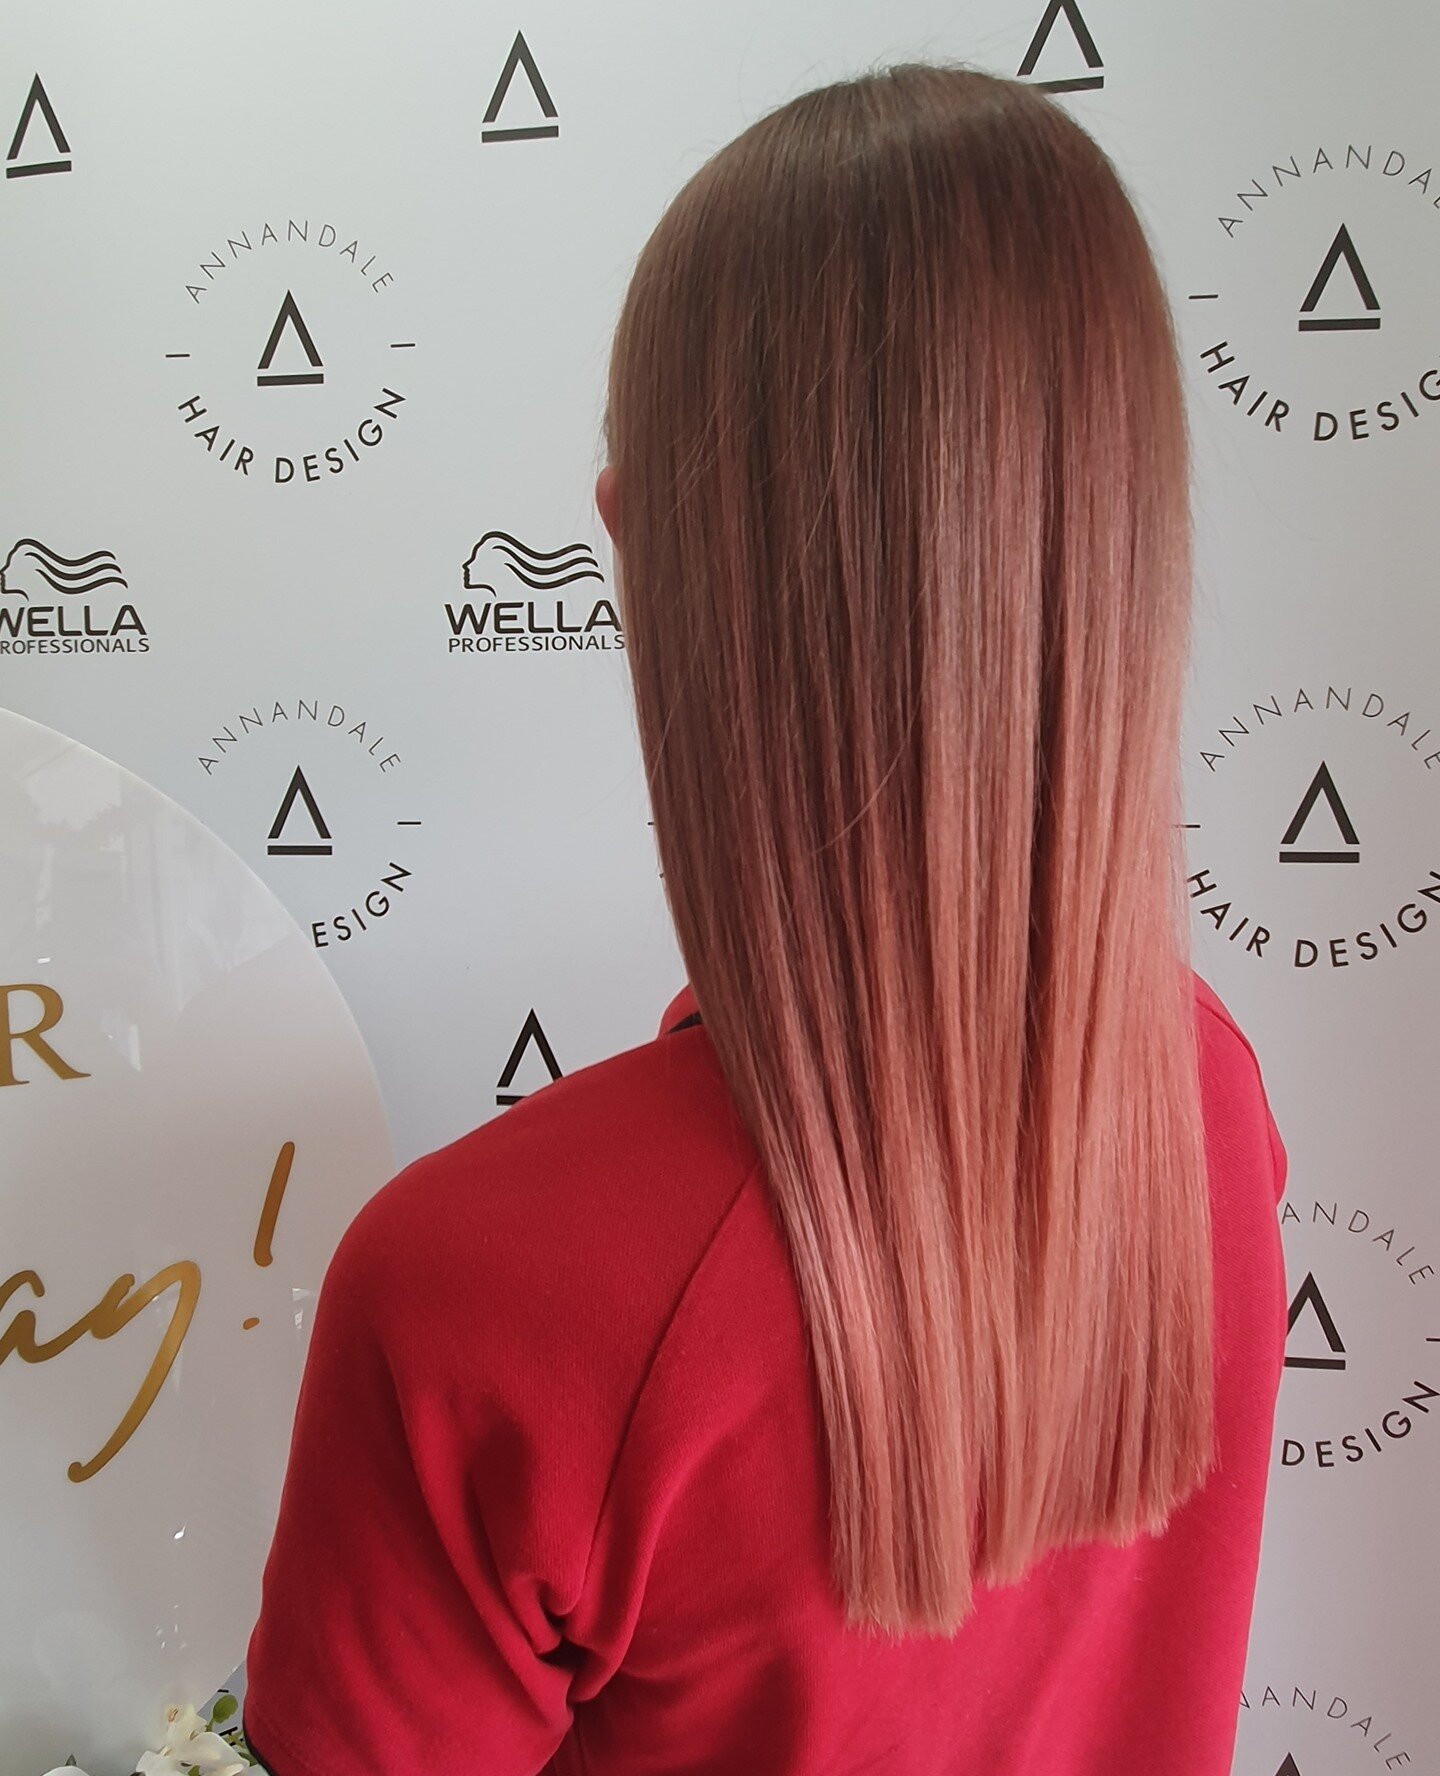 Jump straight into autumn with this sensational, seasonal look 🍂⁠
⁠
Coloured hair doesn't always have to be bright and bold - you can make a statement with a soft pastel or muted tone too!⁠
⁠
Hair by our Creative Director, Amanda ✂️⁠
⁠
.⁠
.⁠
.⁠
⁠
#A